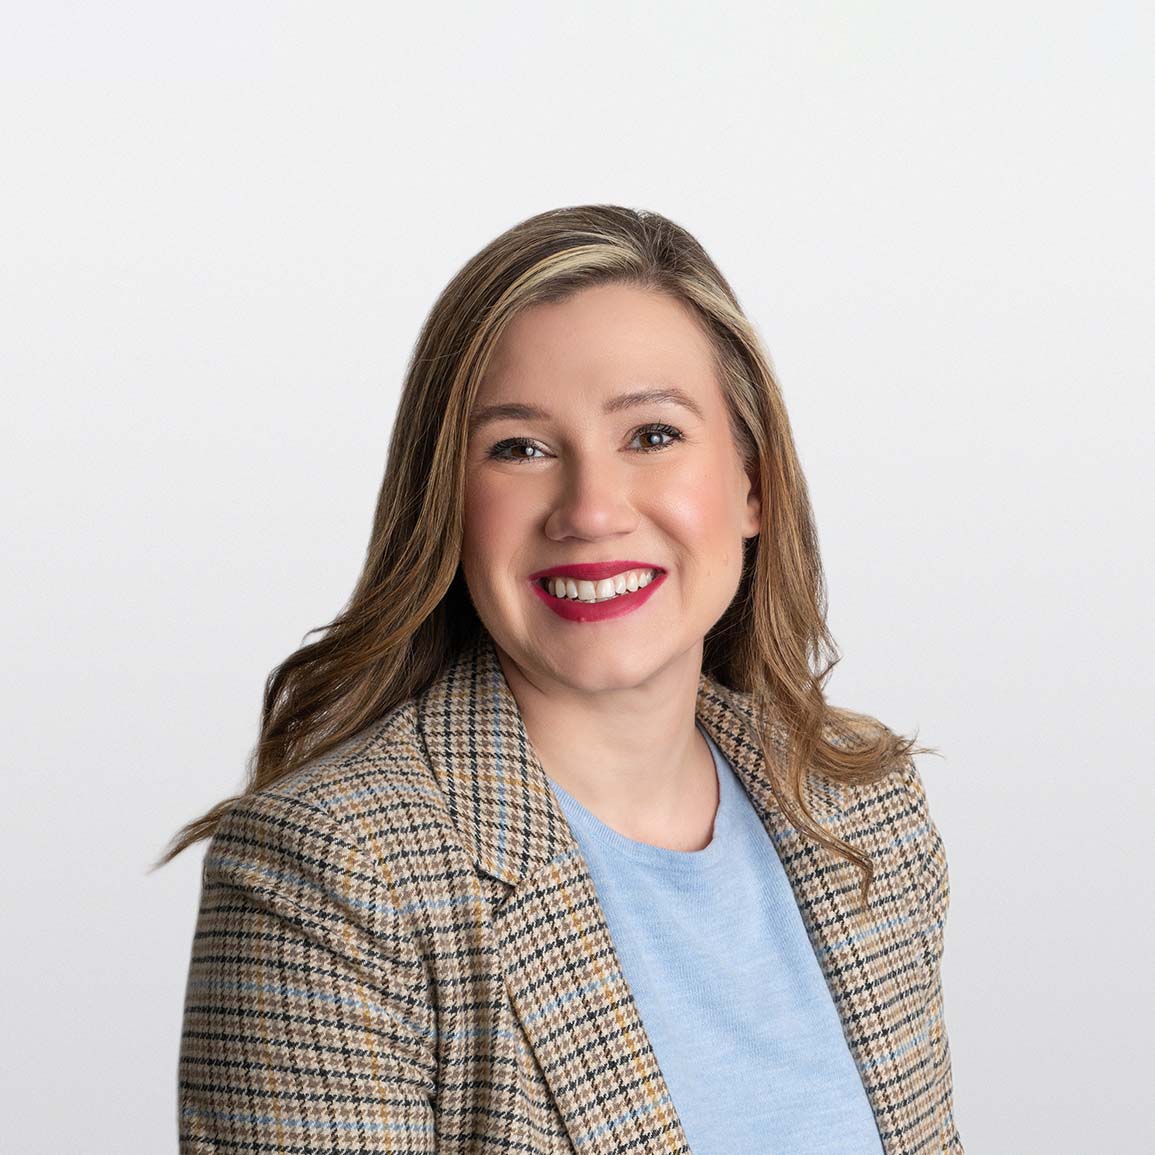 Image of Jessica Mosby, Senior Financial Advisor at ATB Wealth, against white background